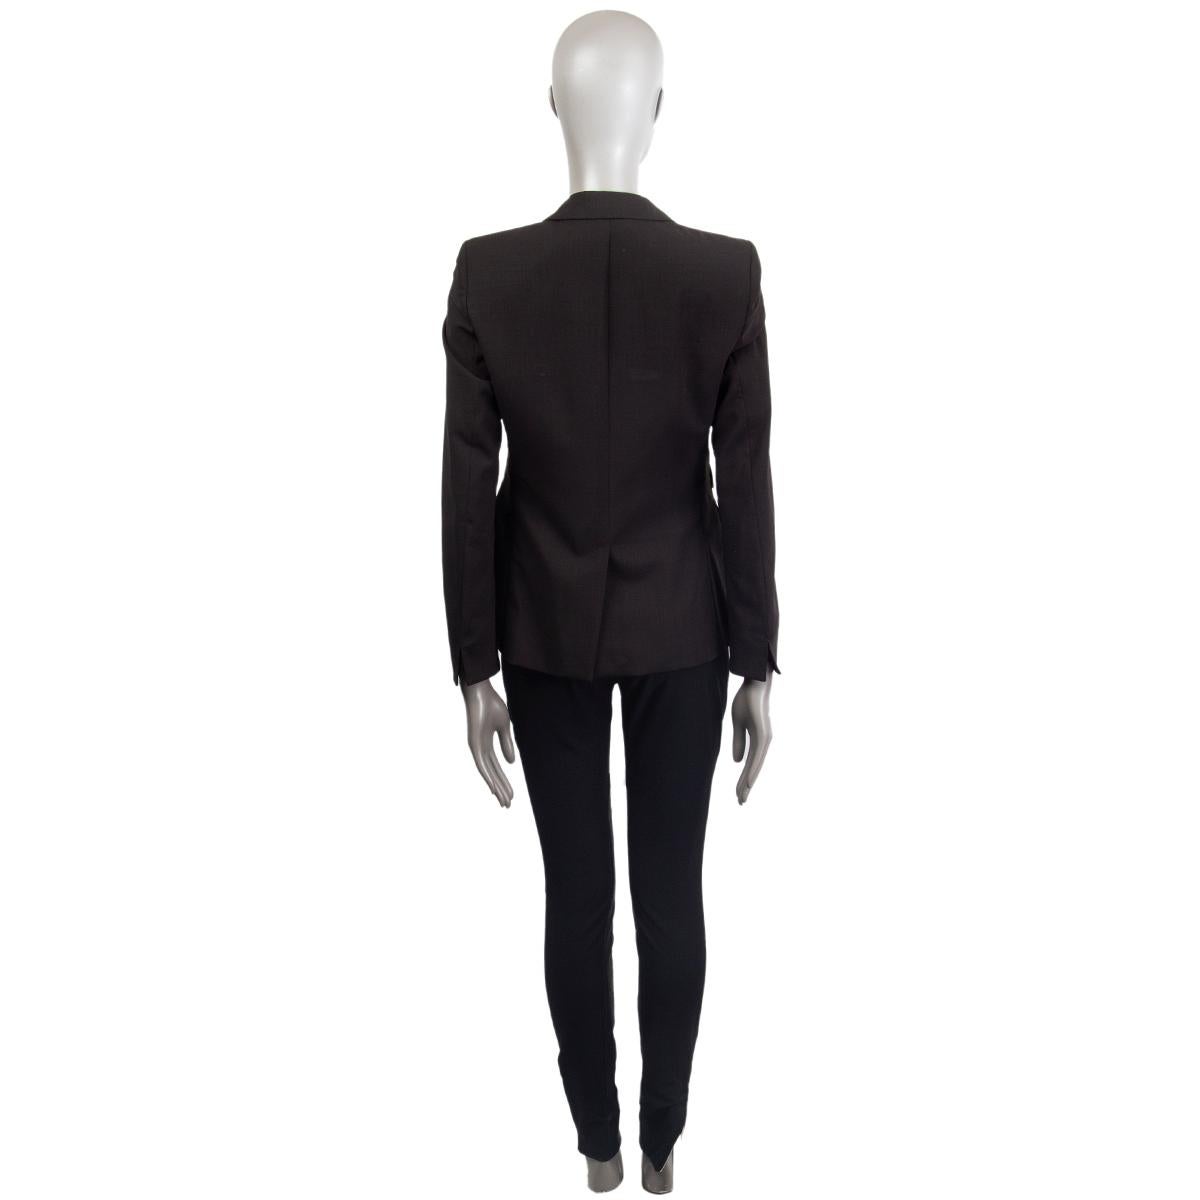 AKRIS black wool CLASSIC Blazer Jacket 36 S In Excellent Condition For Sale In Zürich, CH